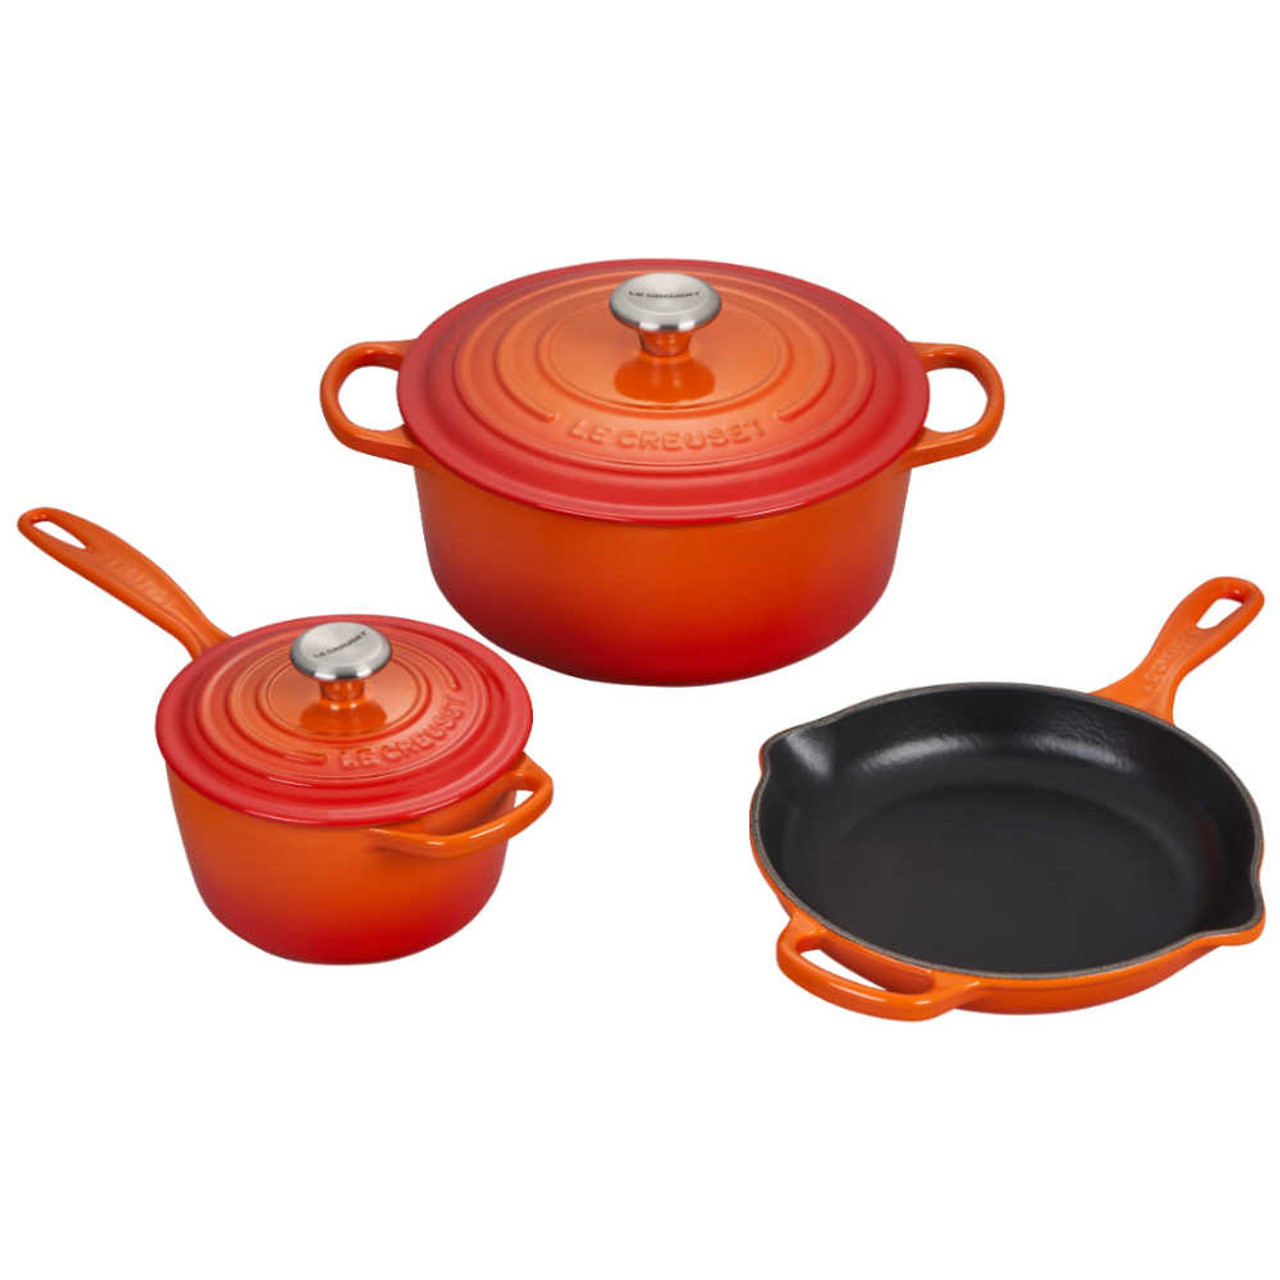 https://cdn11.bigcommerce.com/s-hccytny0od/images/stencil/1280x1280/products/2315/14346/le-creuset-5pc-cookware-set-flame__12397.1614364045.jpg?c=2?imbypass=on